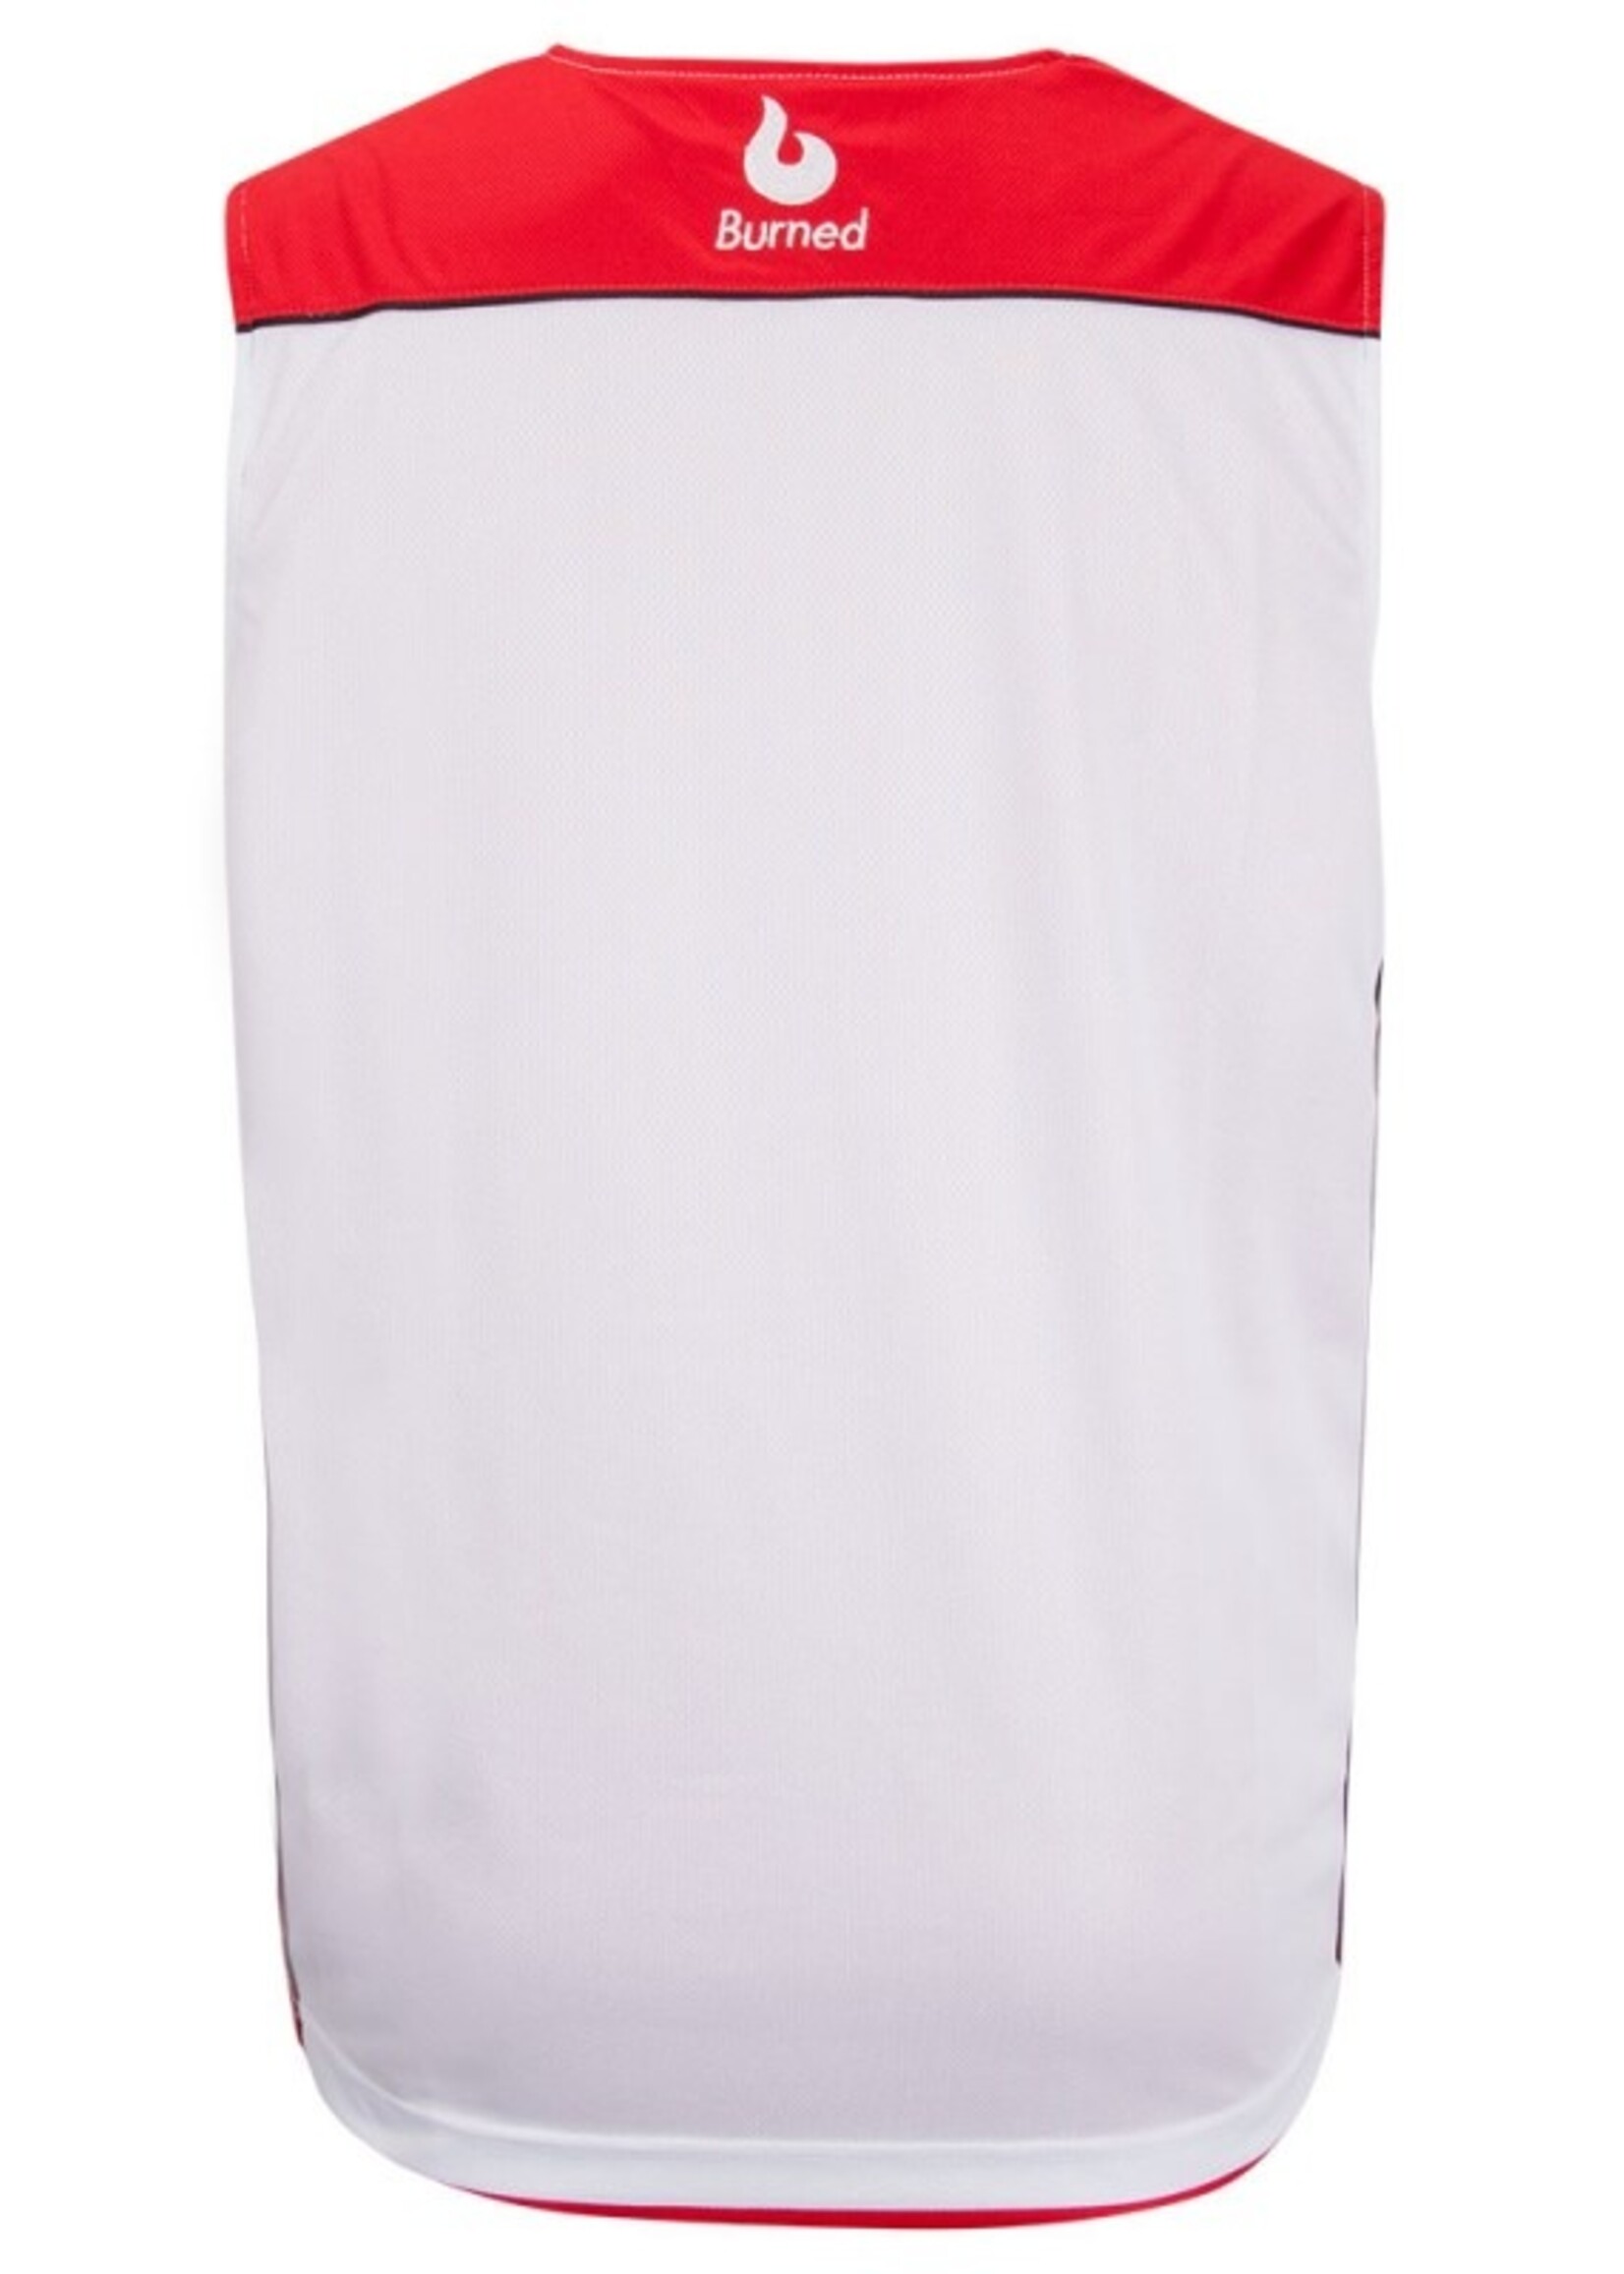 Burned Burned Double Sided Jersey Red White